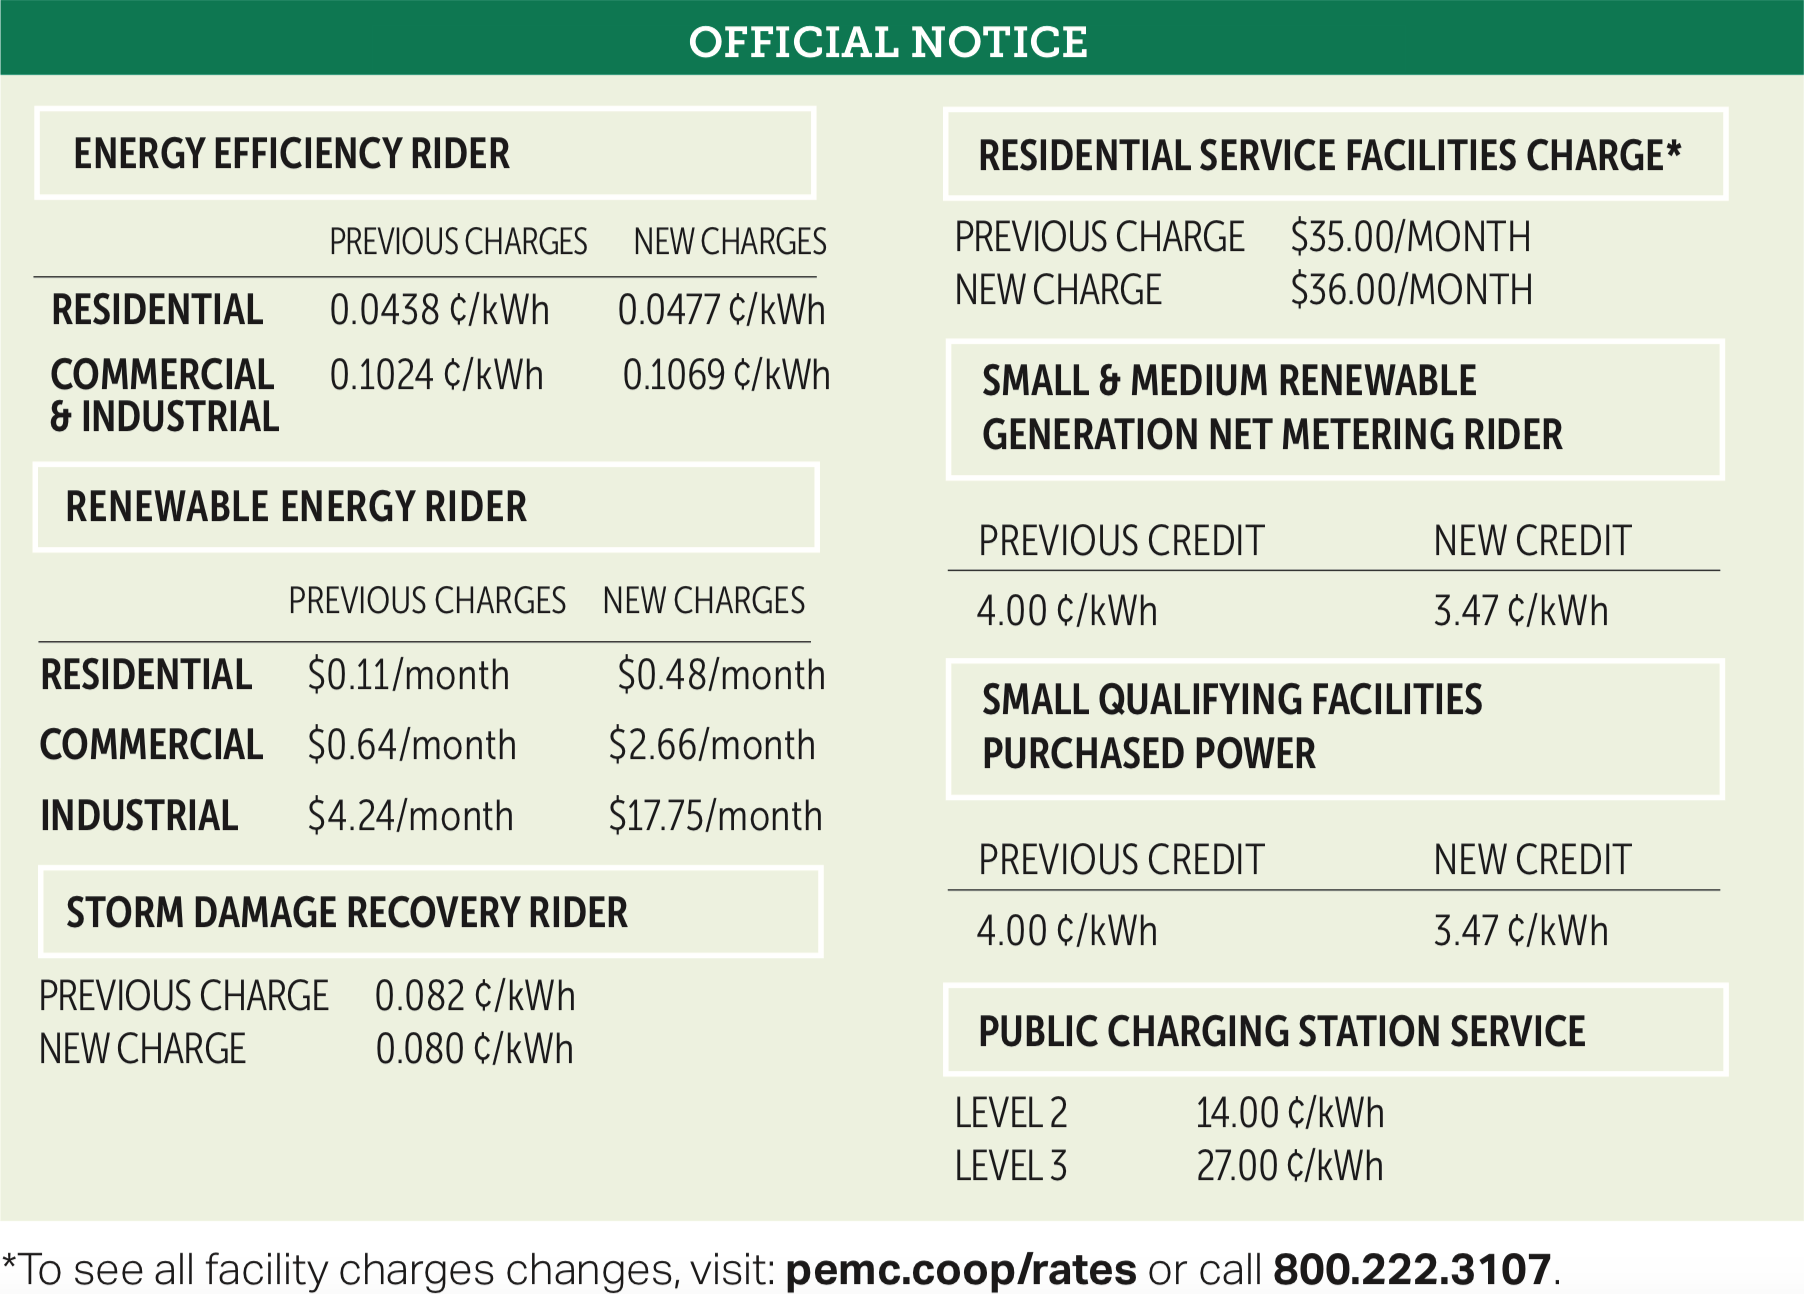 rate rider changes 2020